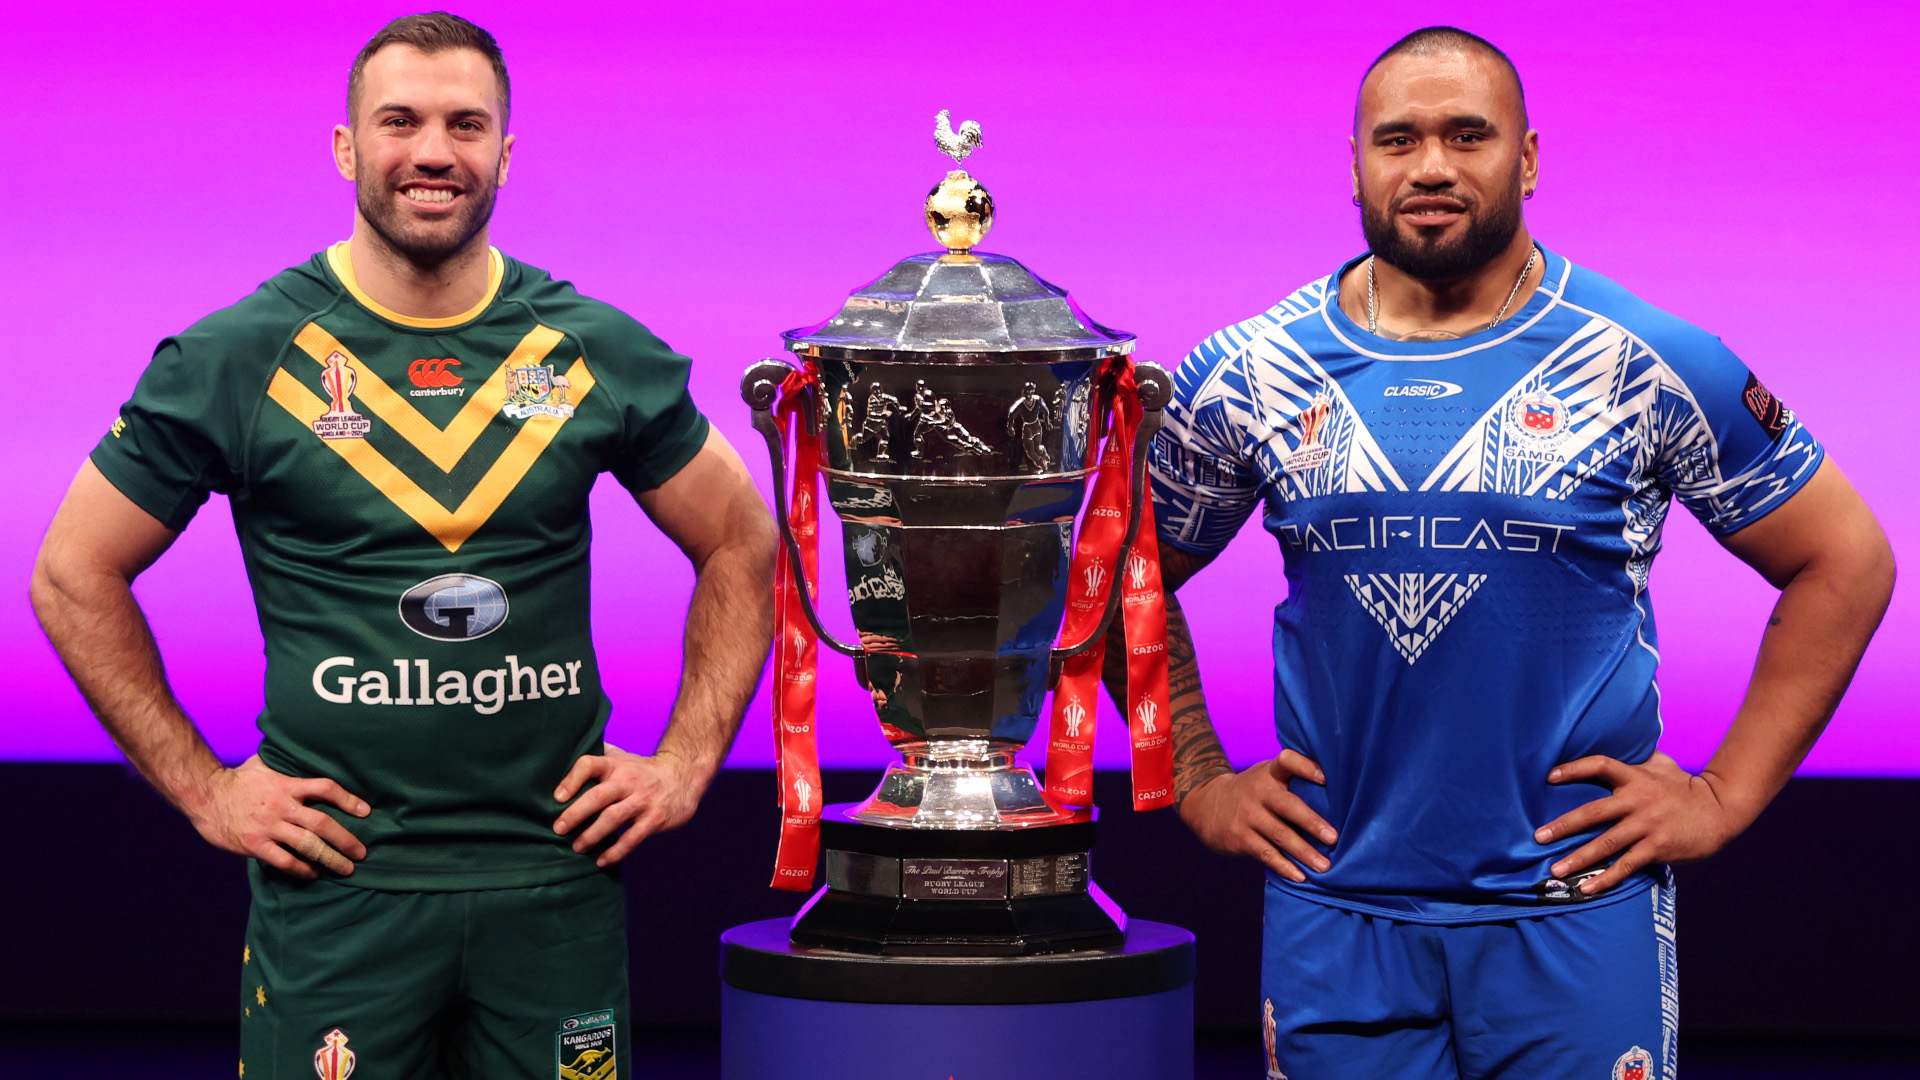 rugby league world cup 2022 how to watch